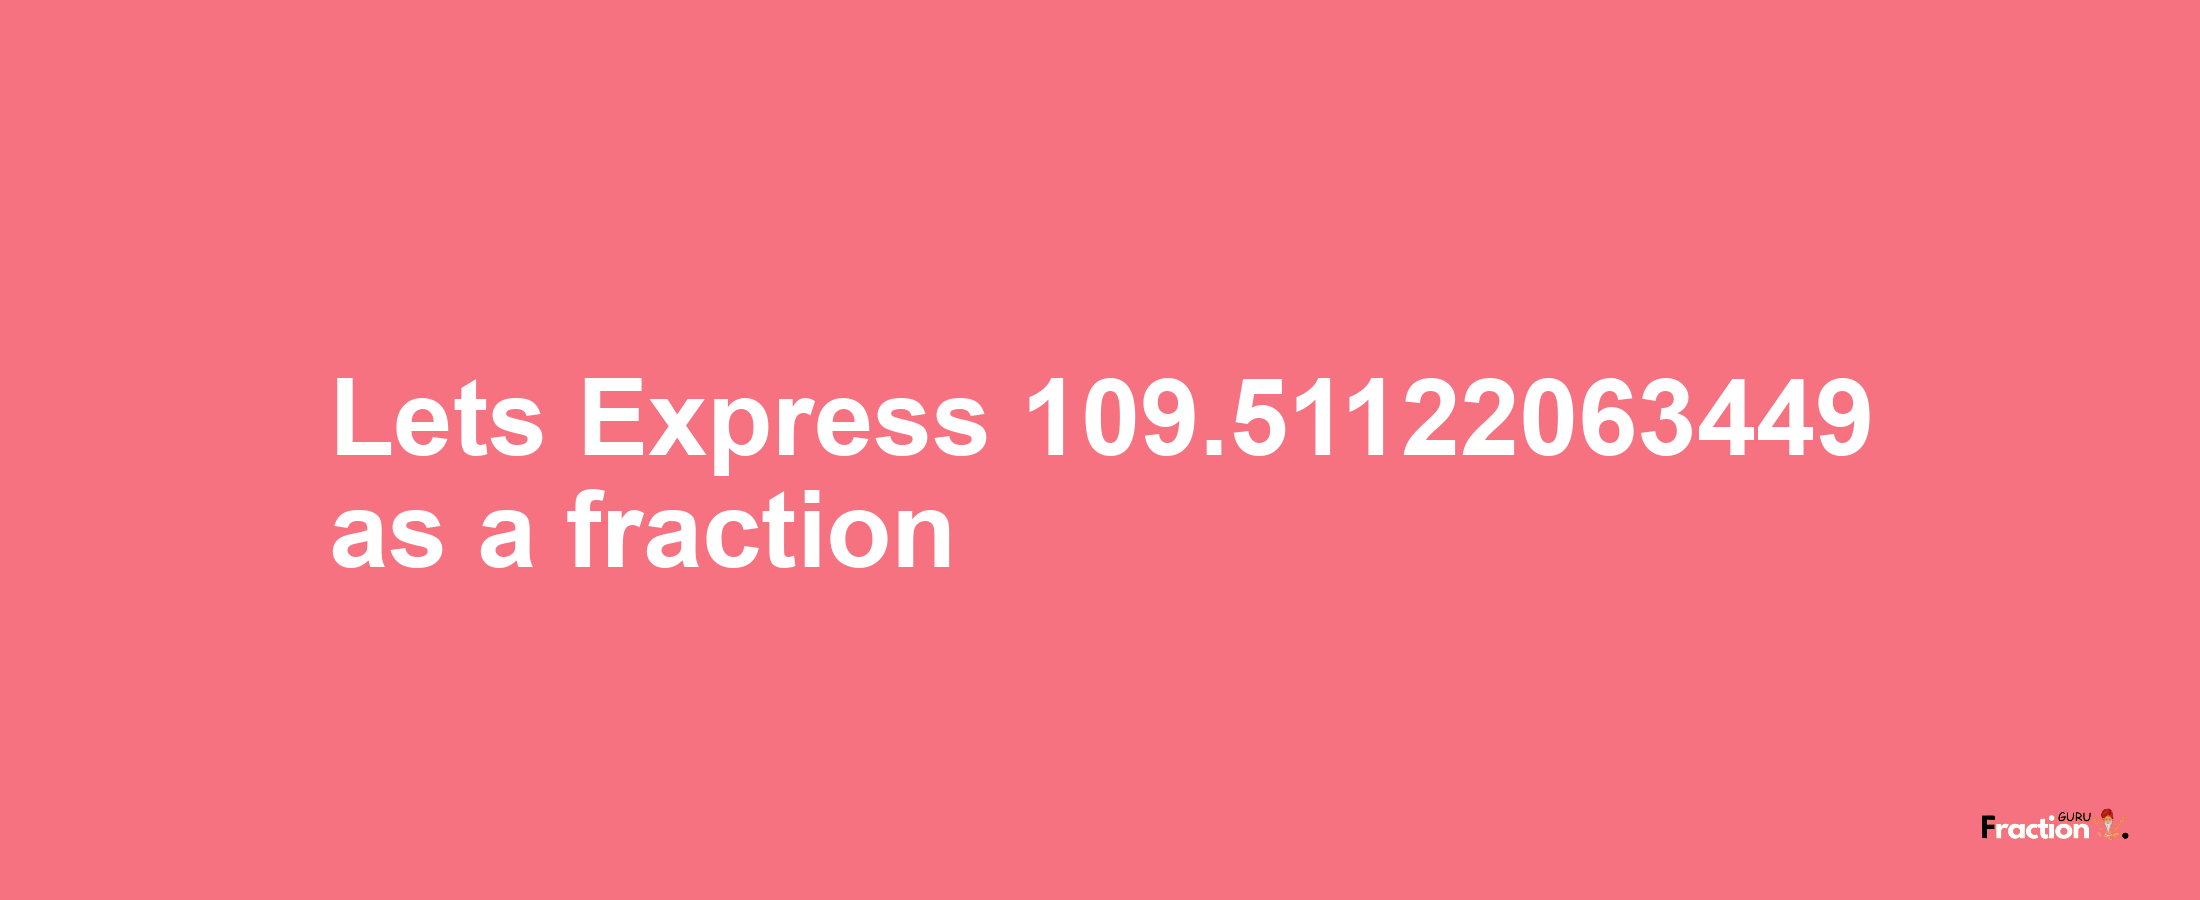 Lets Express 109.51122063449 as afraction